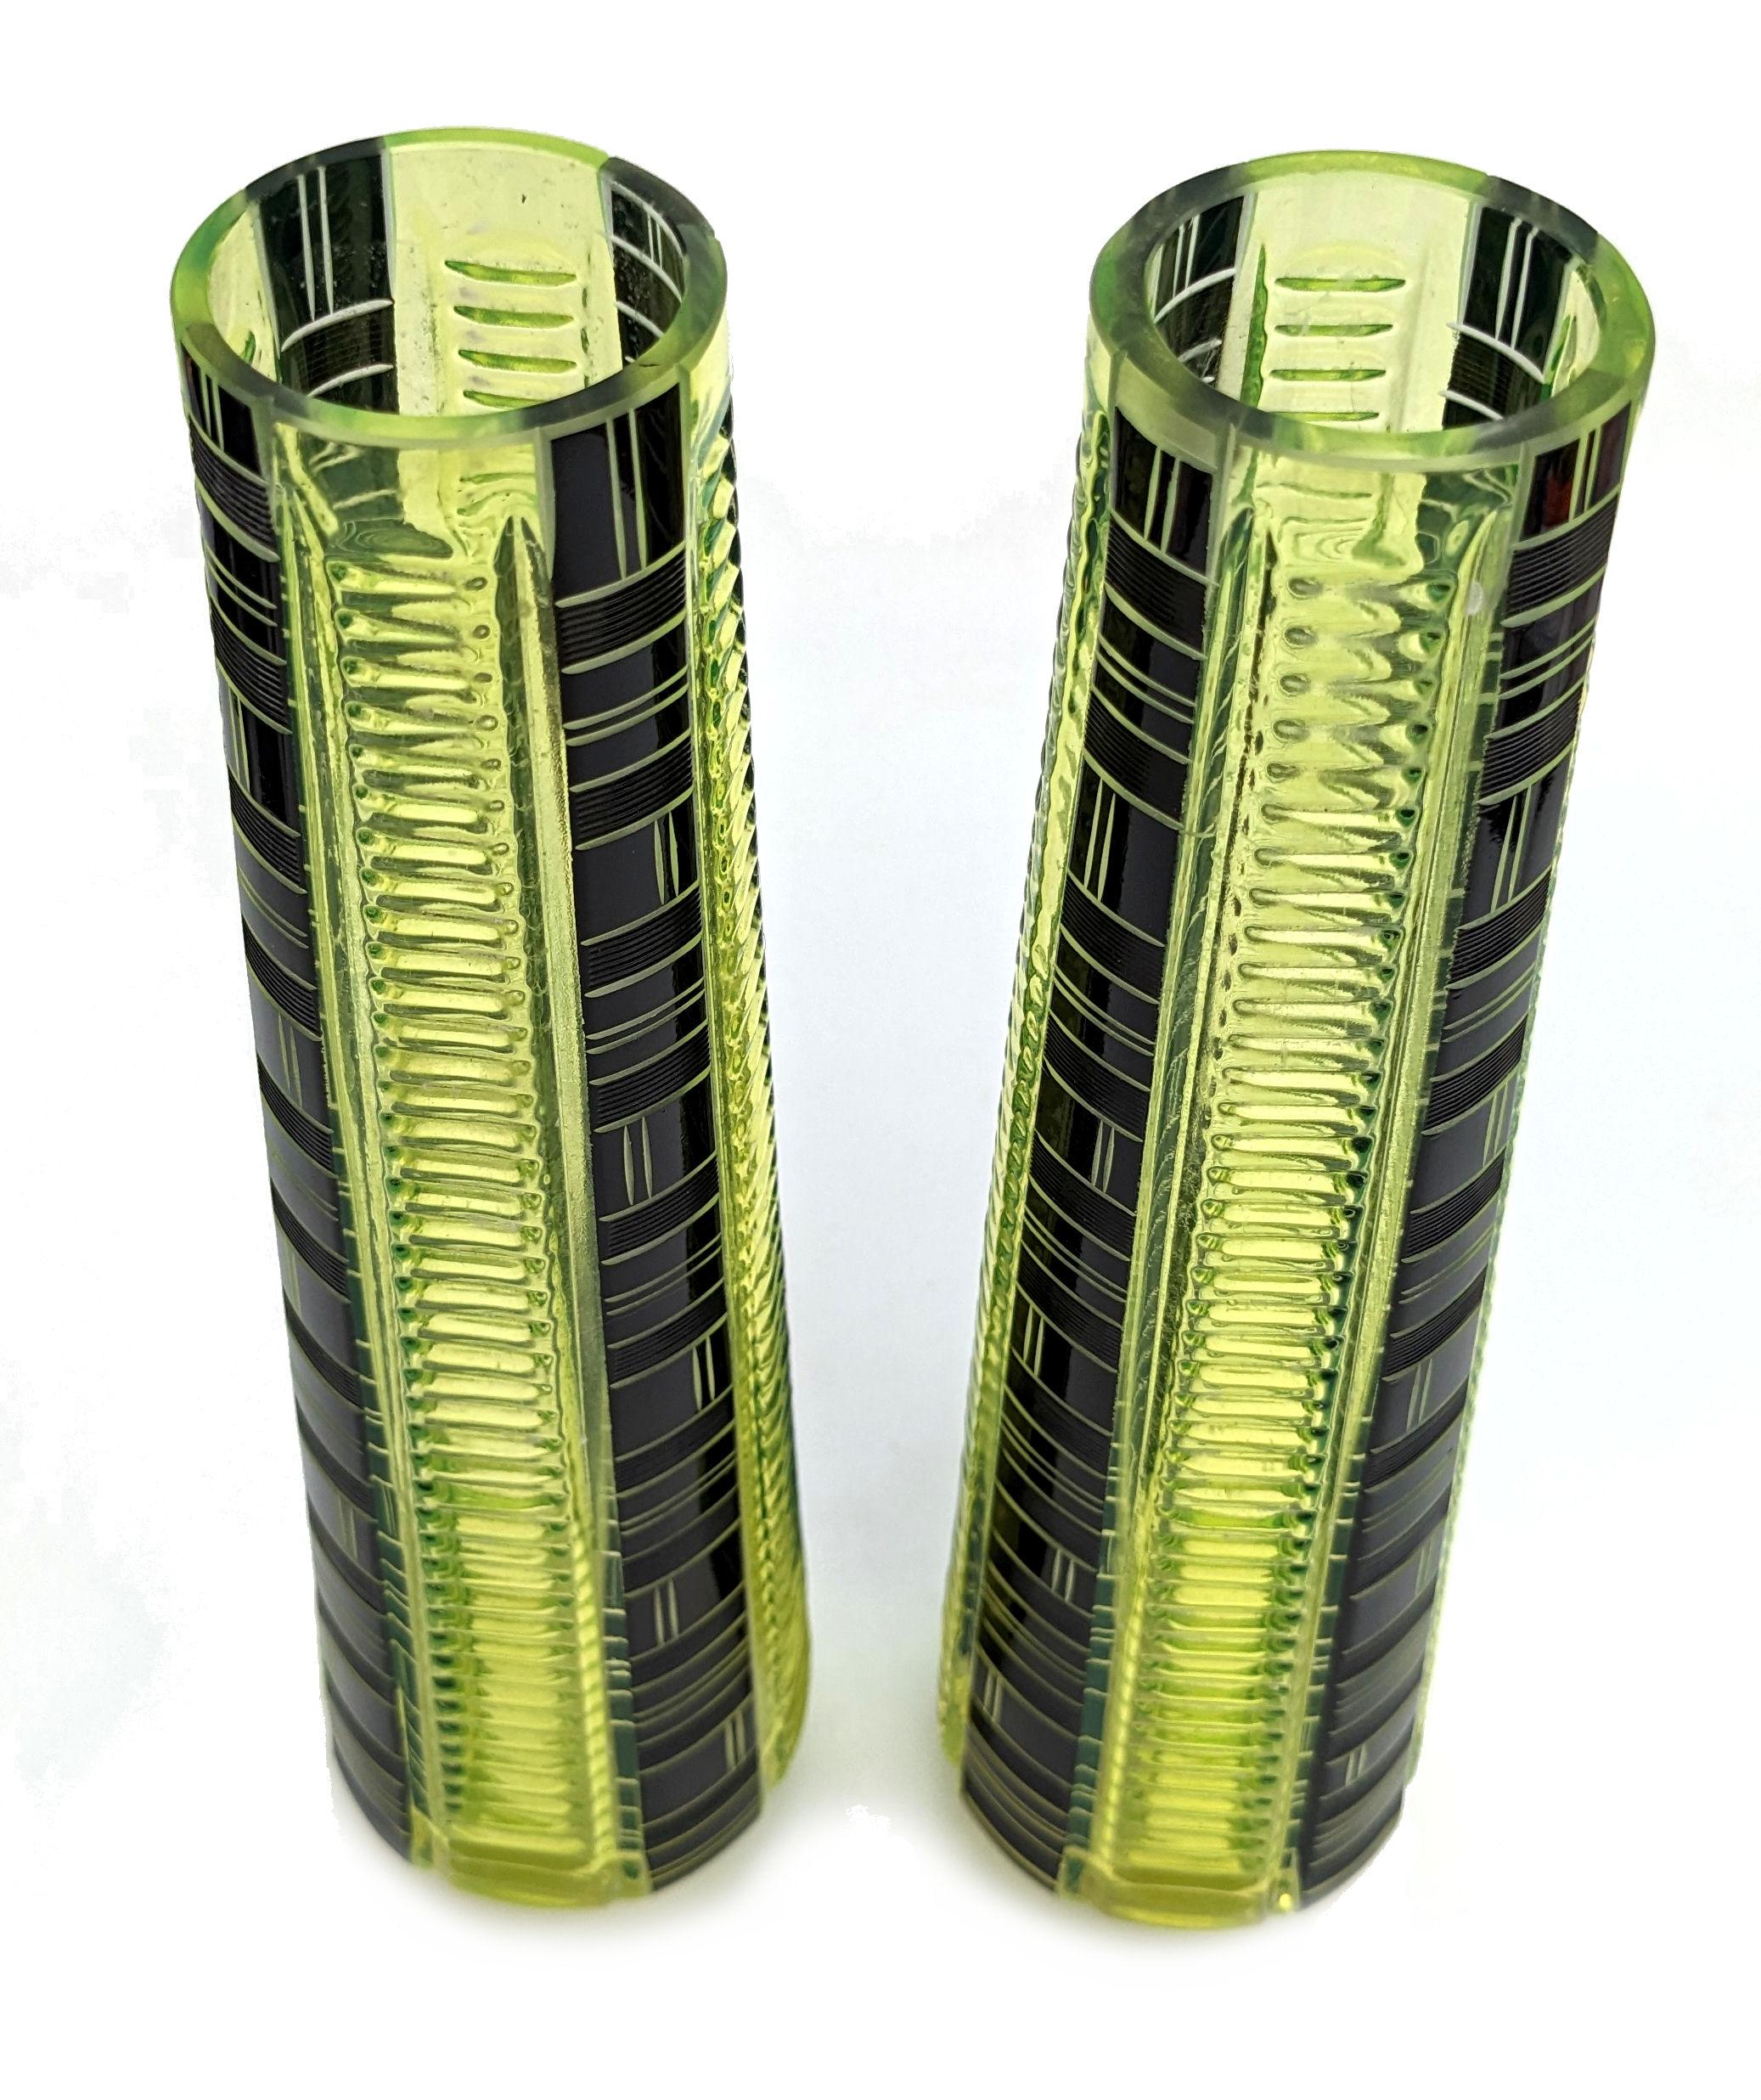 Art Deco Pair Of Tall Uranium Glass Vases By Karl Palda, c1930 For Sale 2